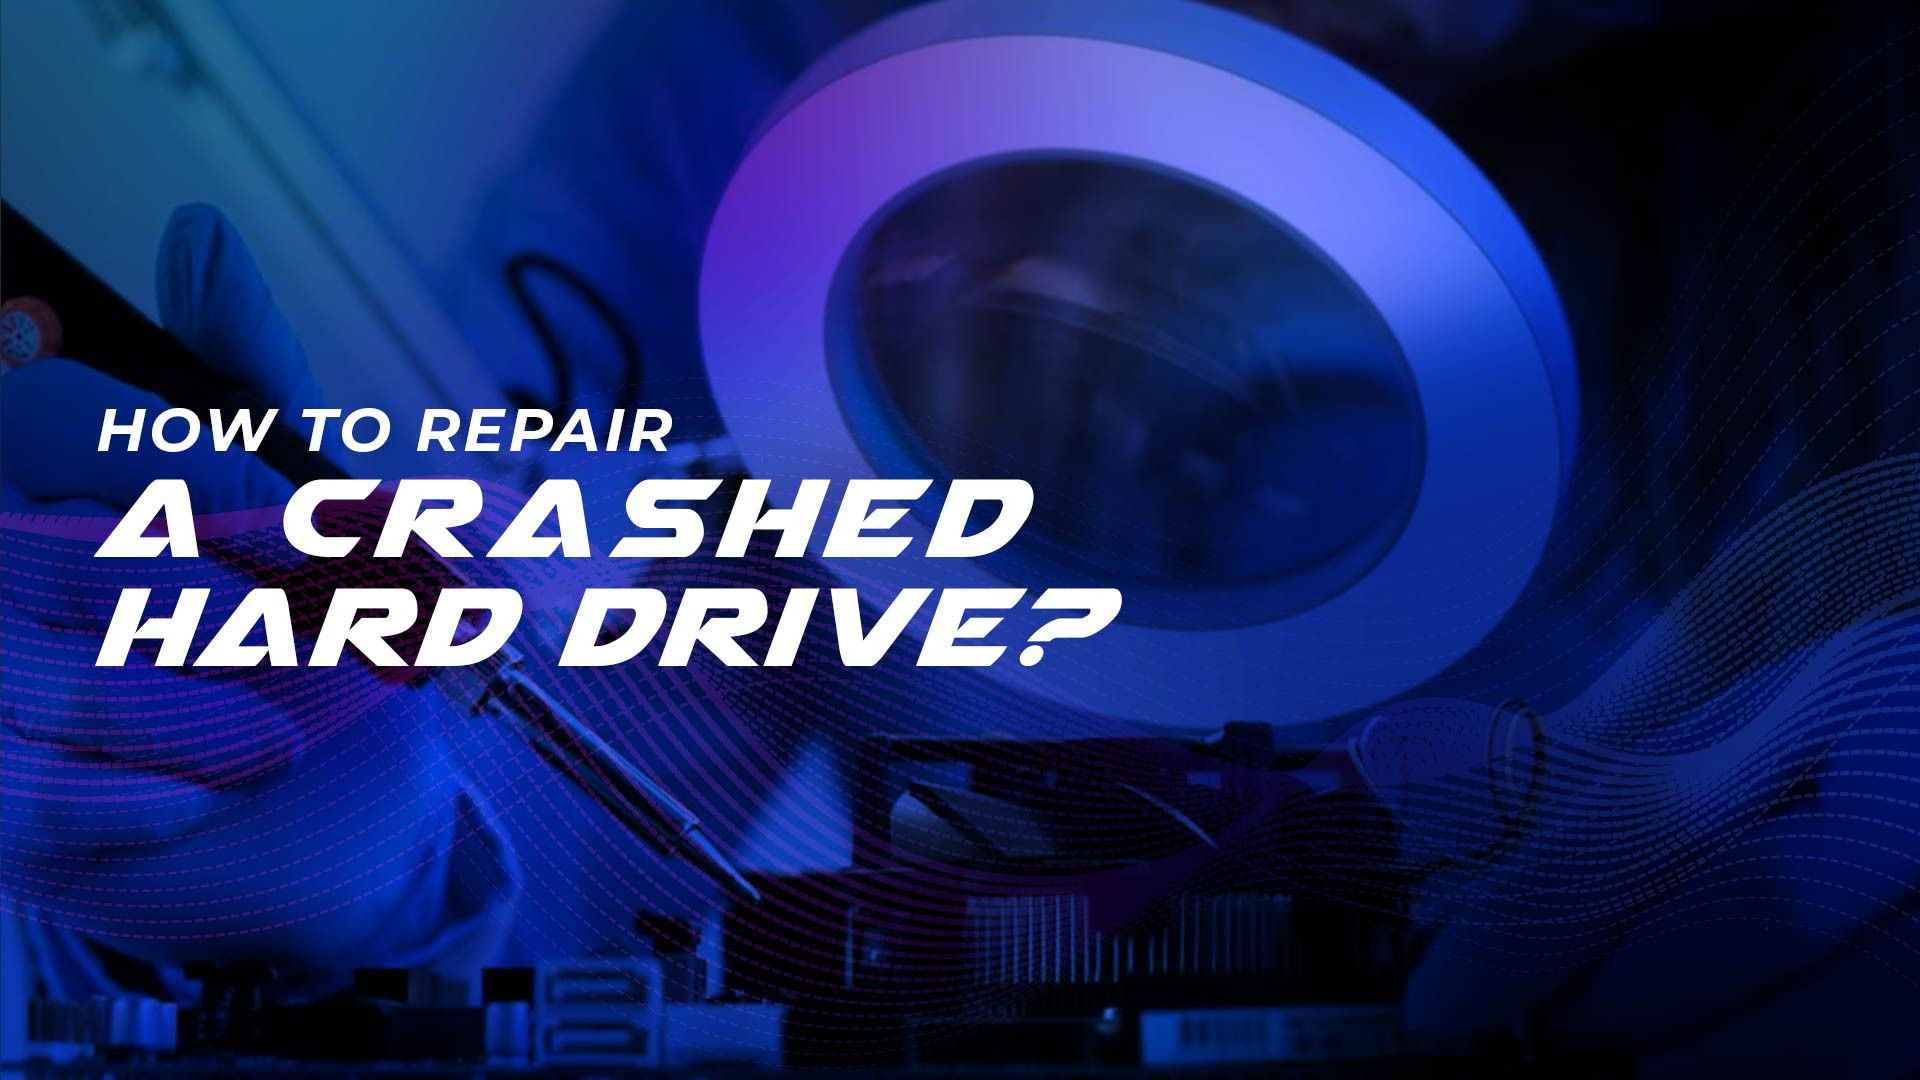 How to repair a crashed hard drive